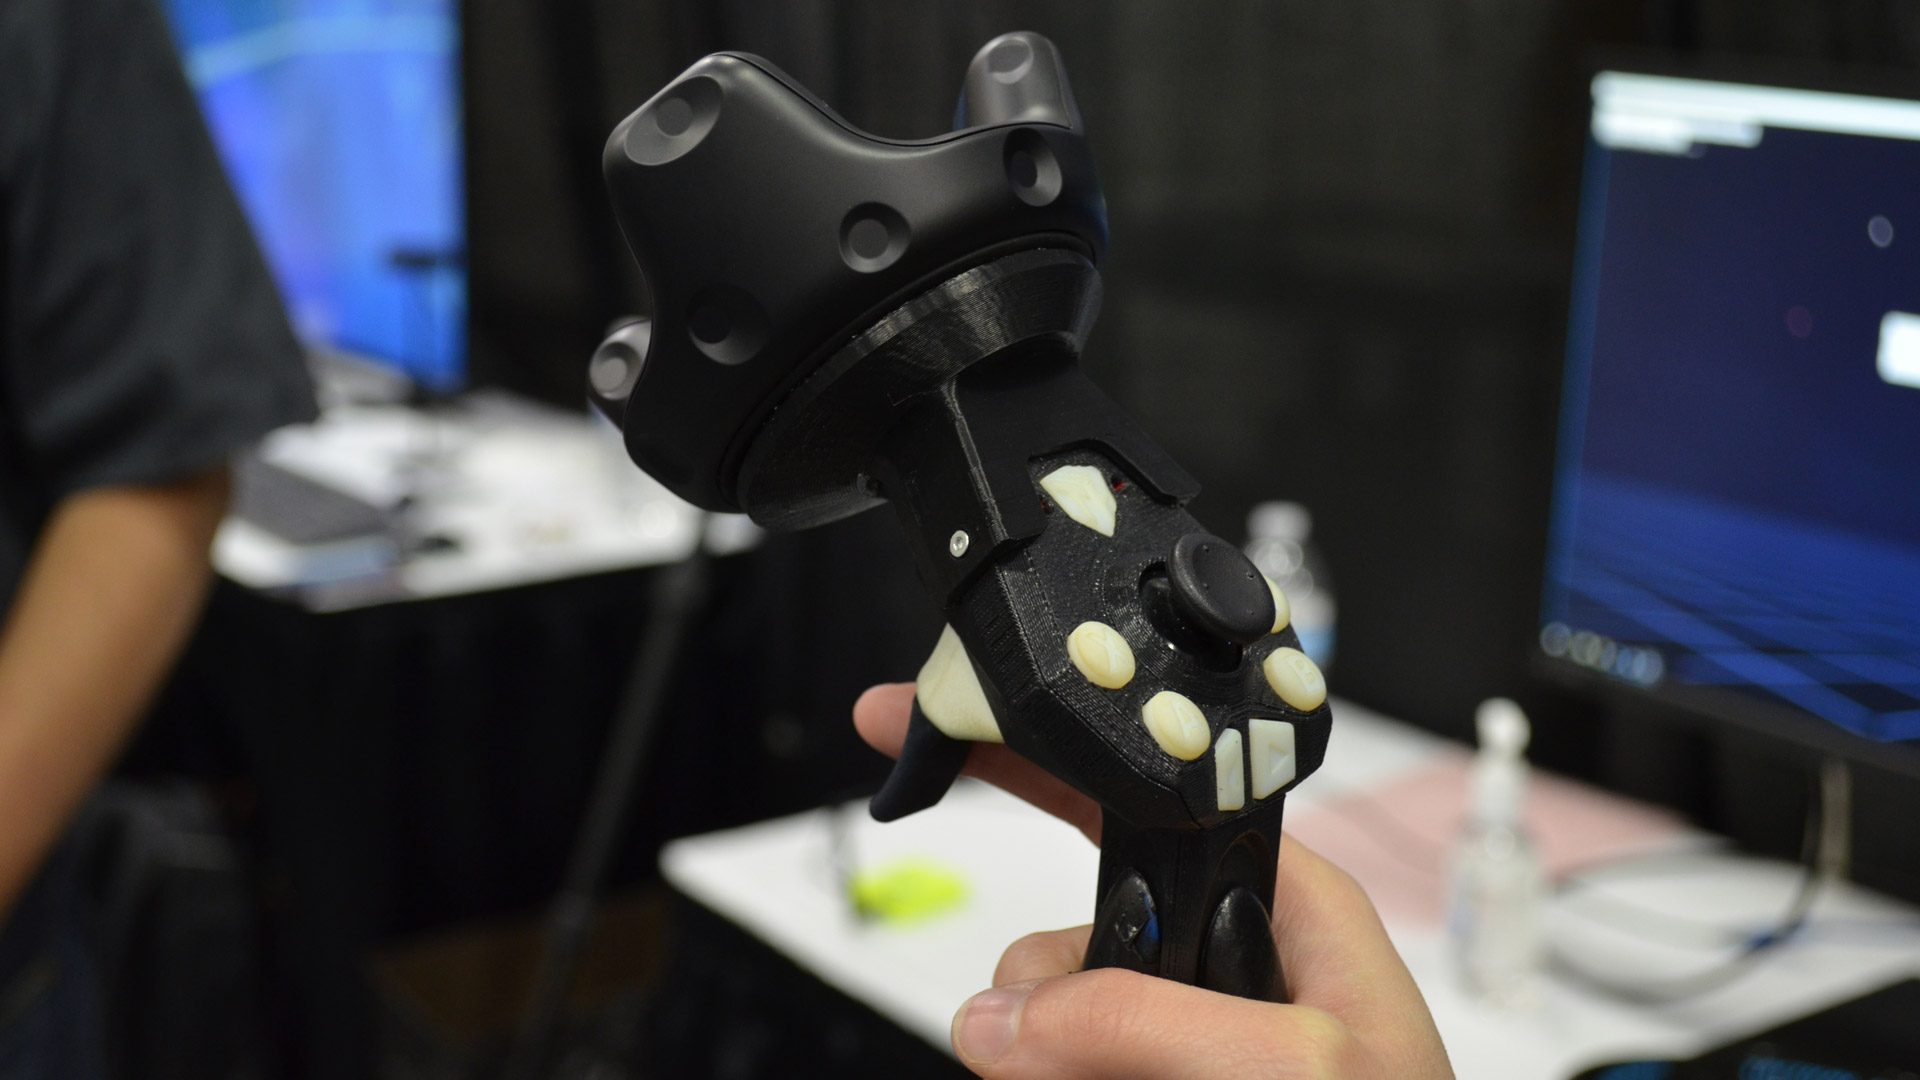 Haptics Reactive Grip Controller with Vive Tracker, Touch, and SteamVR Tracking